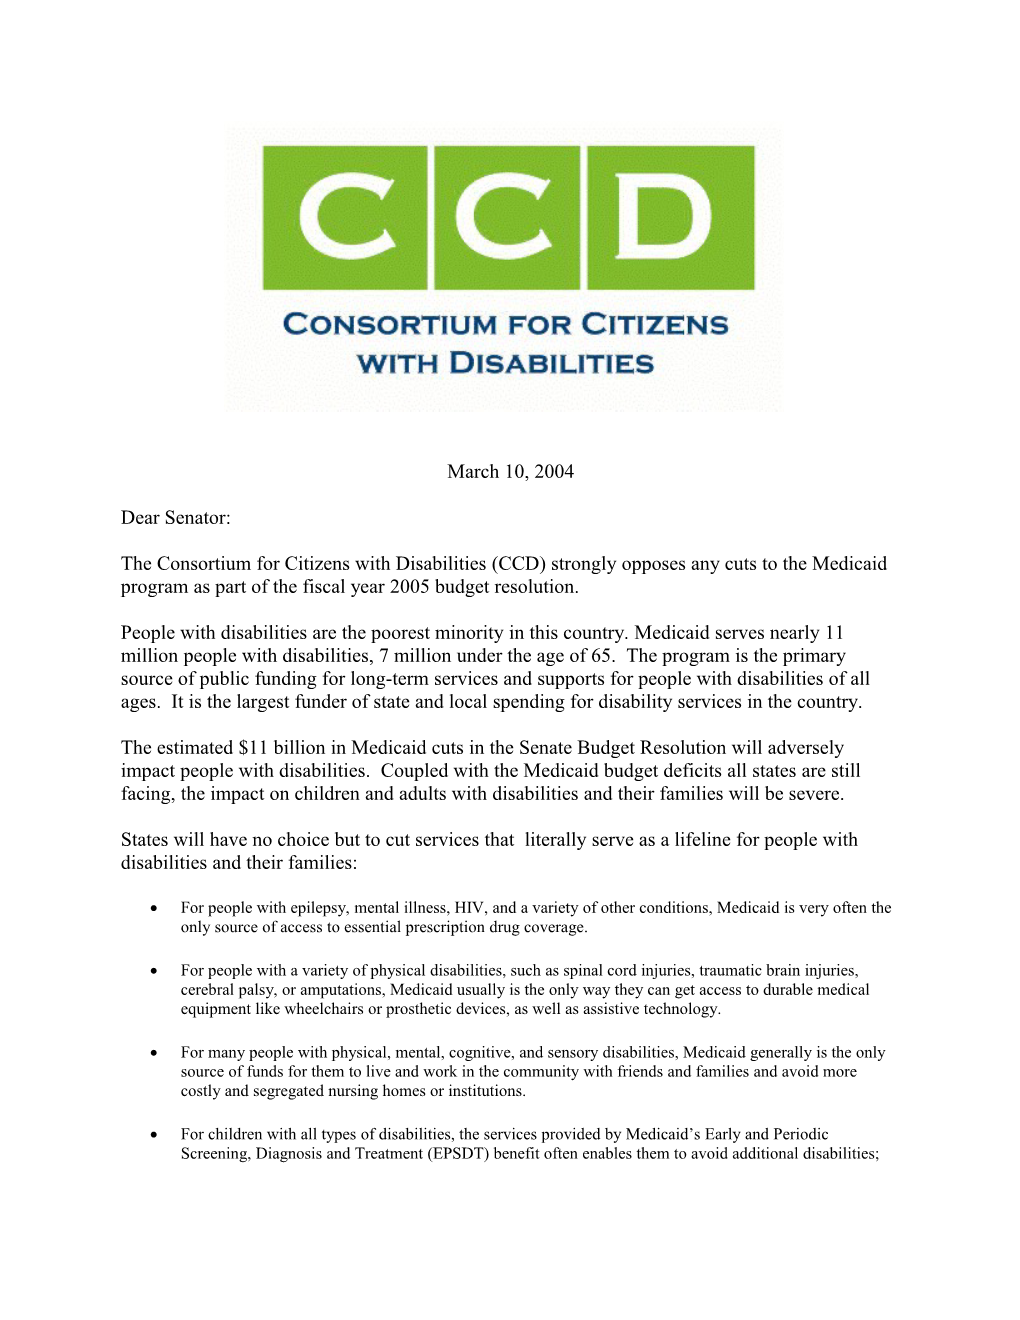 The Consortium for Citizens with Disabilities (CCD) Strongly Opposes Any Cuts to the Medicaid